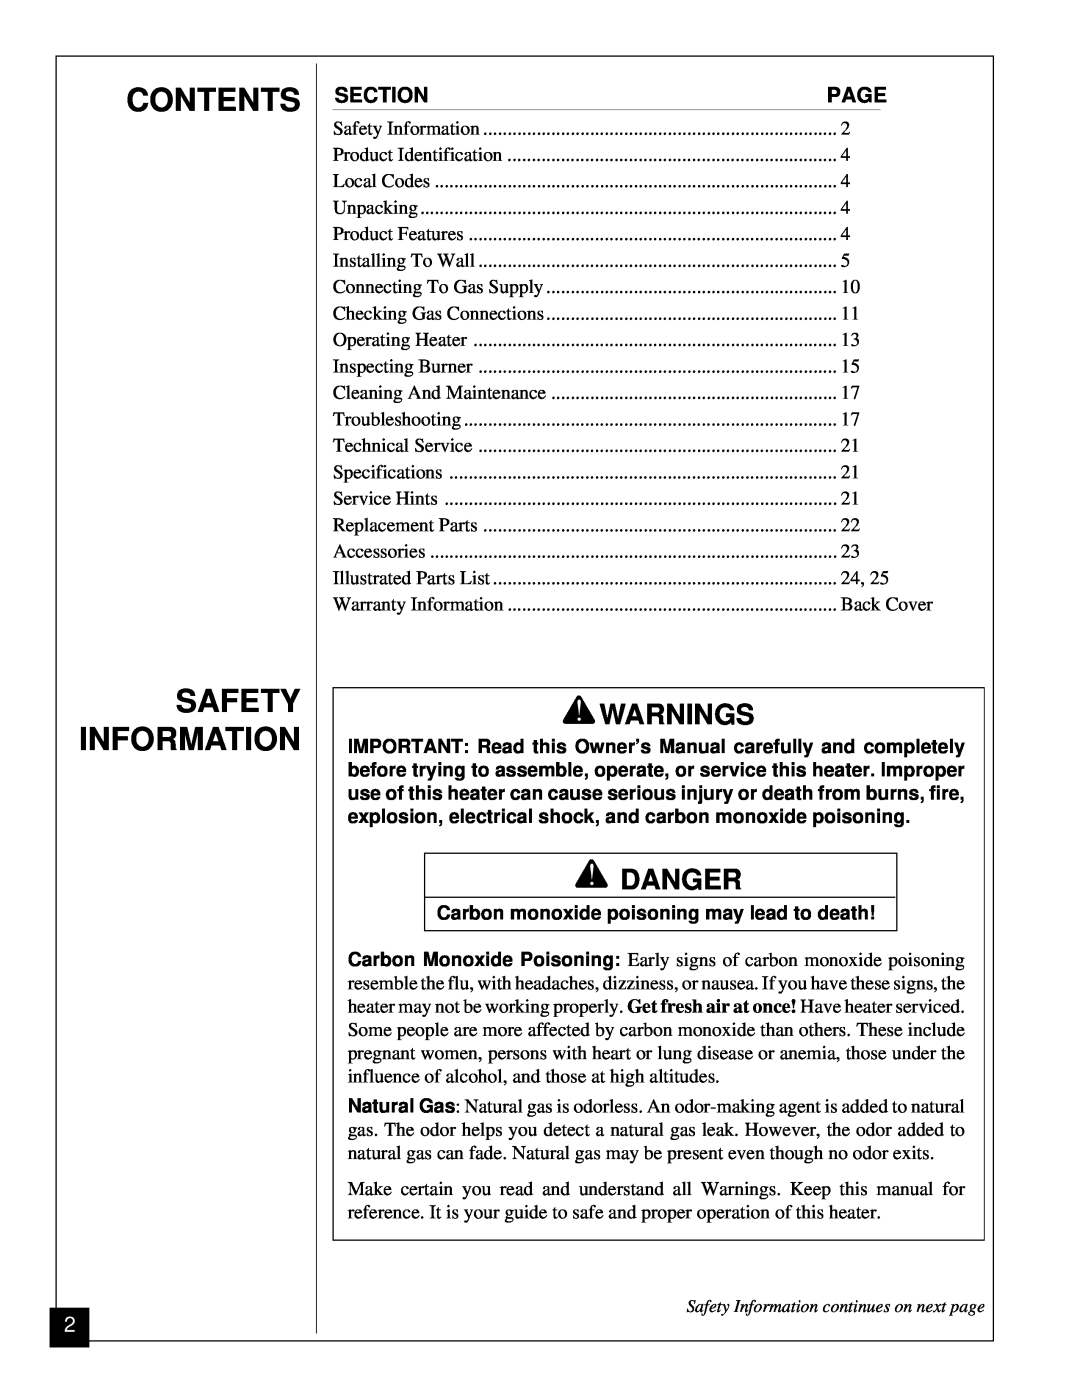 Vanguard Heating VGN30 installation manual Contents Safety Information, Warnings, Danger 